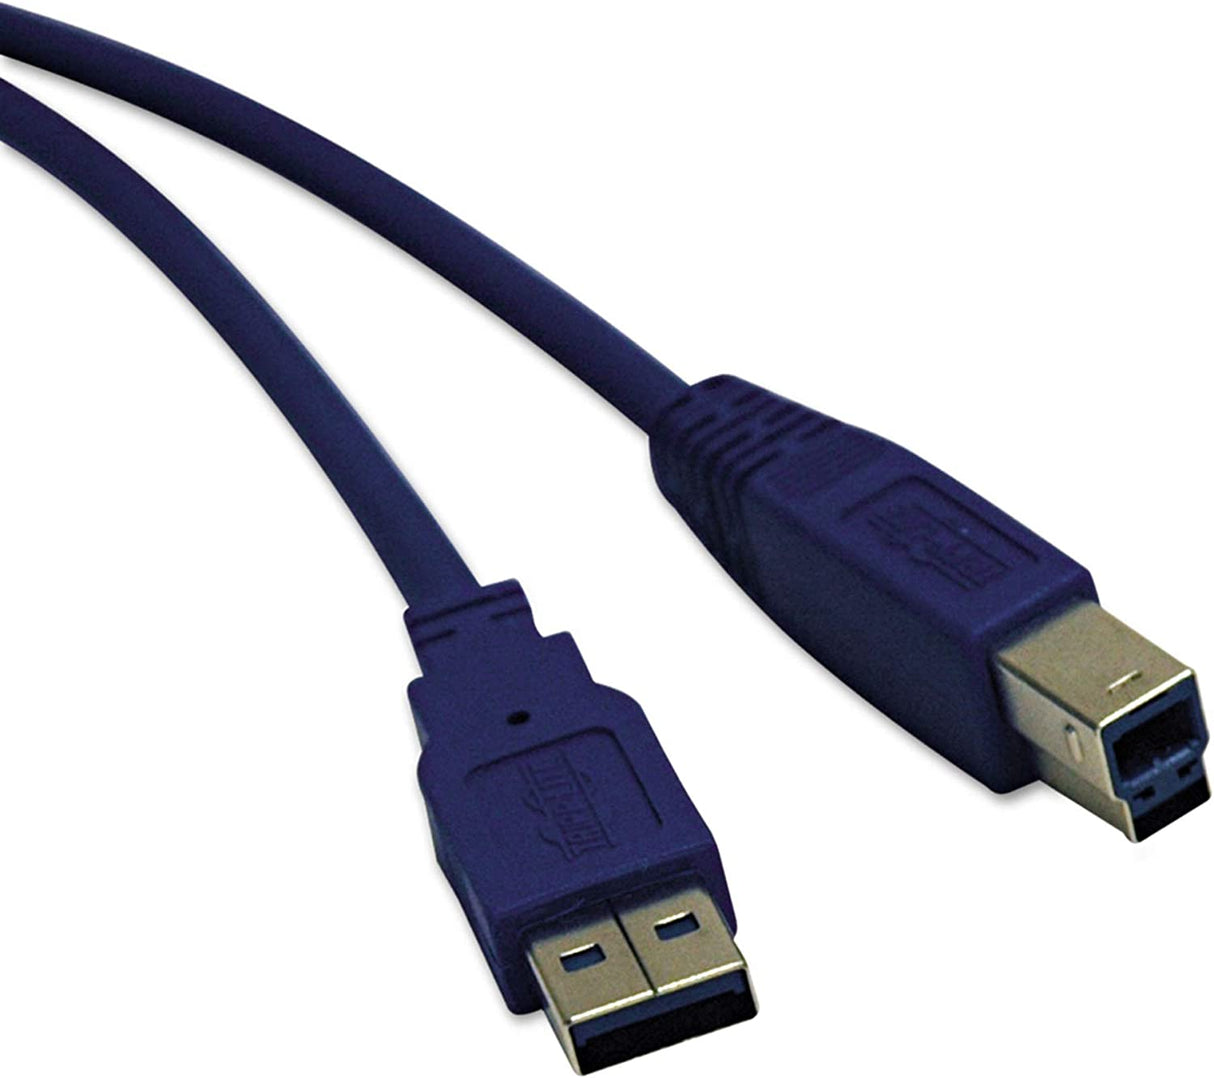 Tripp Lite USB 3.0 Superspeed Cable,Cable,Usb3.0 A/B 15 Ft,Be